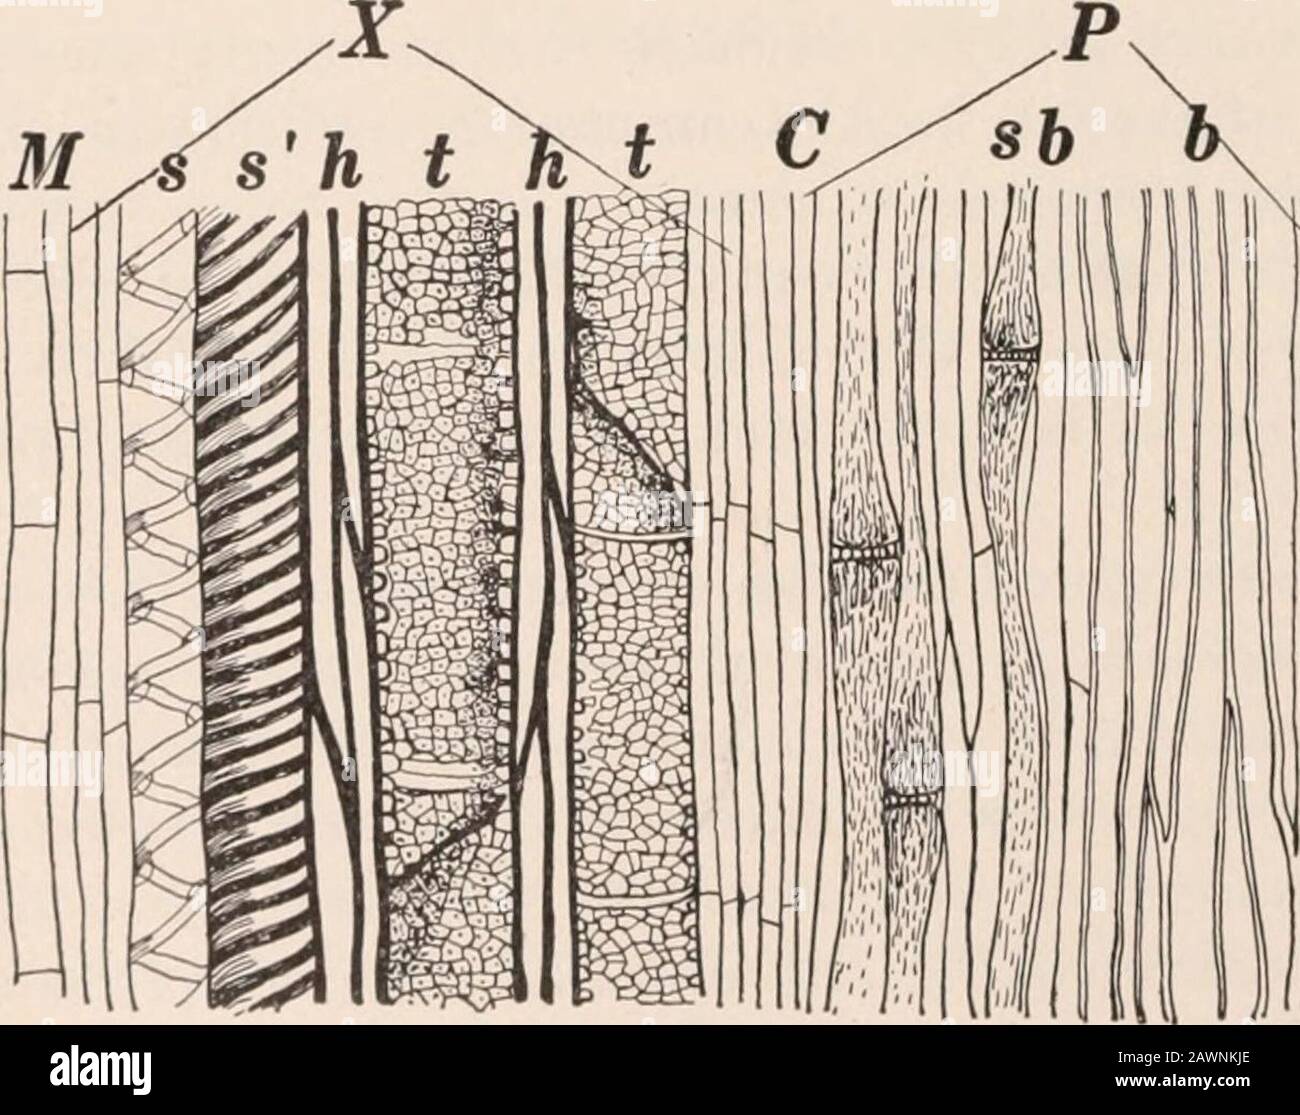 A practical course in botany : with especial reference to its bearings on agriculture, economics, and sanitation . 121 R -A Figs. 120-121. — Transverse and longitudinal sections of a fibrovasoular bundlein the stem of a sunflower. The two sections are lettered to correspond : M, pith(parenchyma) ; X, xylcm region ; P, phloem ; R, cortex ; s, spiral ducts ; s, annularducts: t,t, pitted ducts; C, cambium between the phloem and xylem regions; sb,sieve tubes; 6, bast; e, bundle sheath; ic, cambium (parenchyma) cells; h, wood fioers. THE STEM 105 cambium and pith, which includes the medullary rays Stock Photo